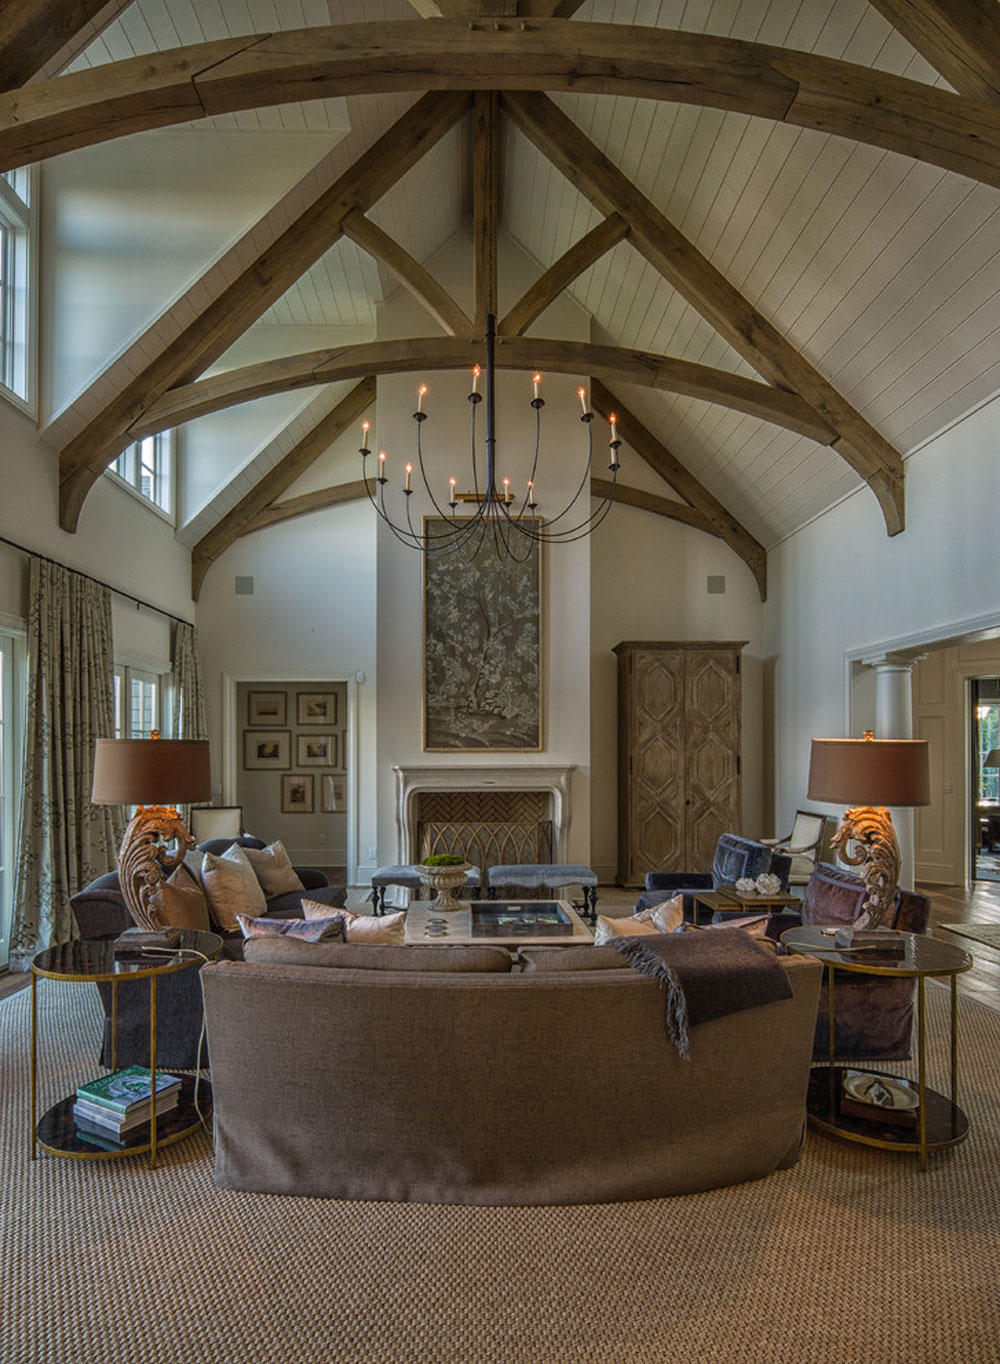 Great-rooms-by-Carolina-Timberworks Cathedral ceiling ideas: Lighting, insulation, and tips for decorating one